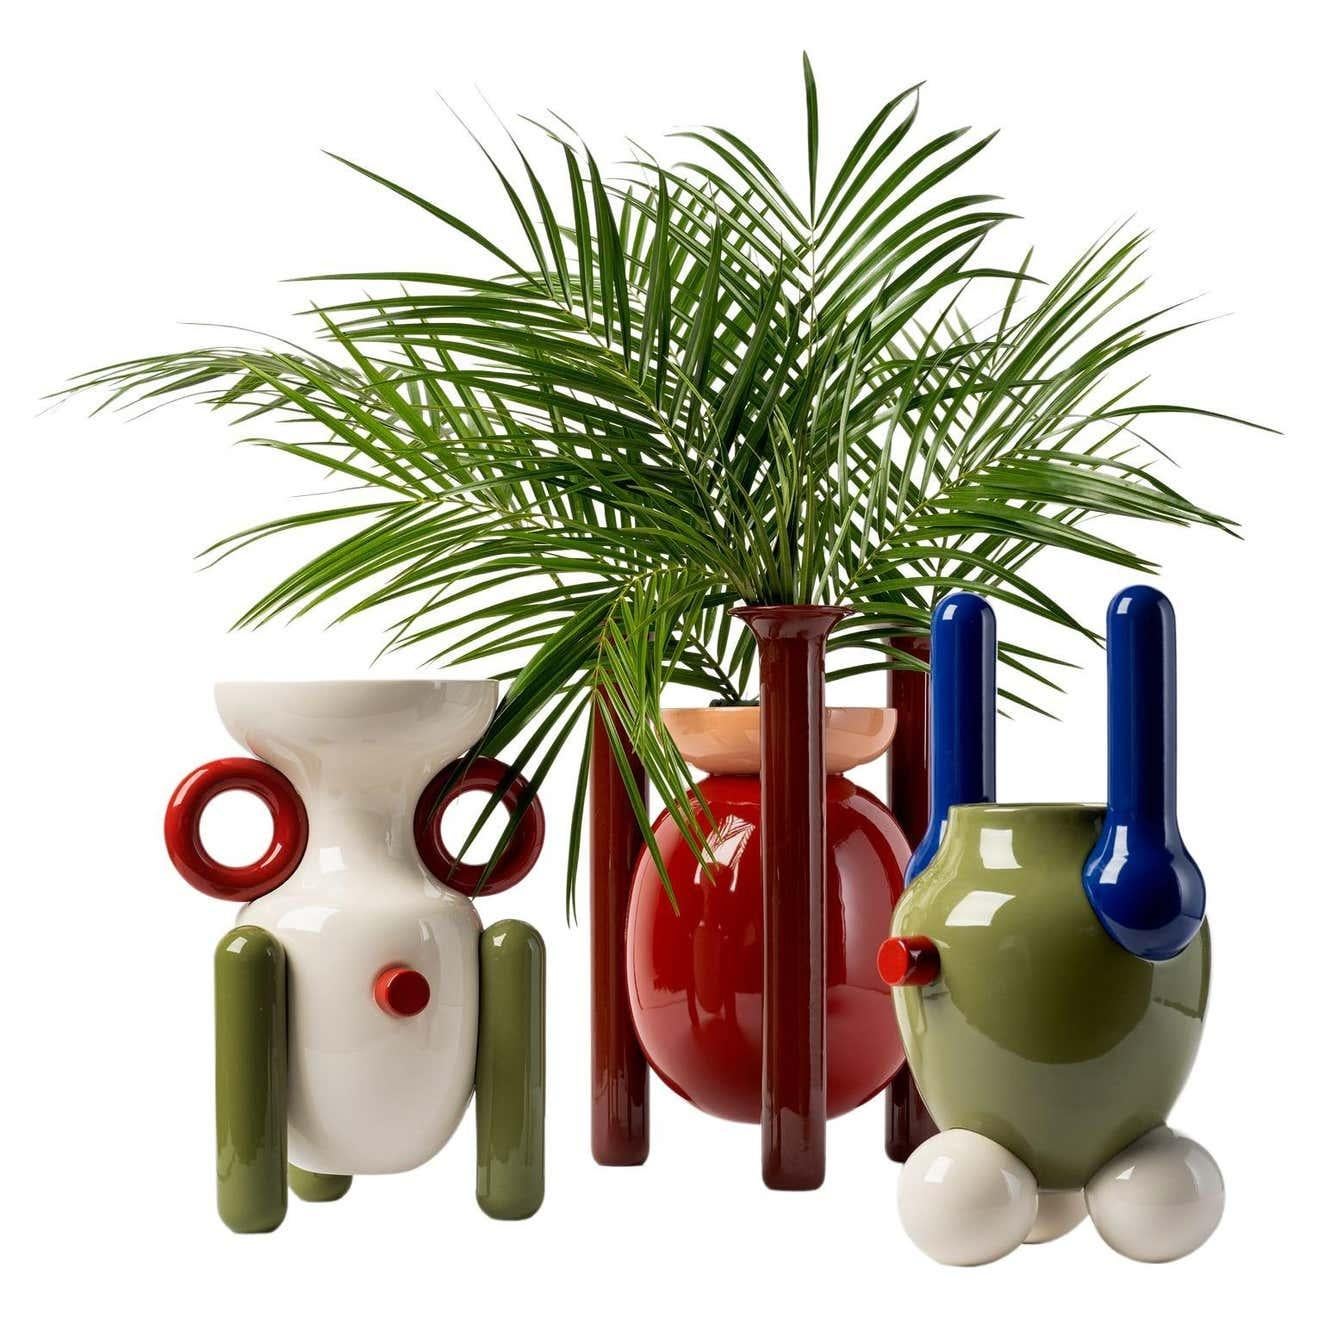 Contemporary glazed ceramic explorer vase No.1

Materials: 
Ceramic

Dimensions: 
D 30 cm x W 30 cm x H 40 cm

The Showtime Vases are just as current as when we launched them over 10 years ago. They are little decorative sculptures that